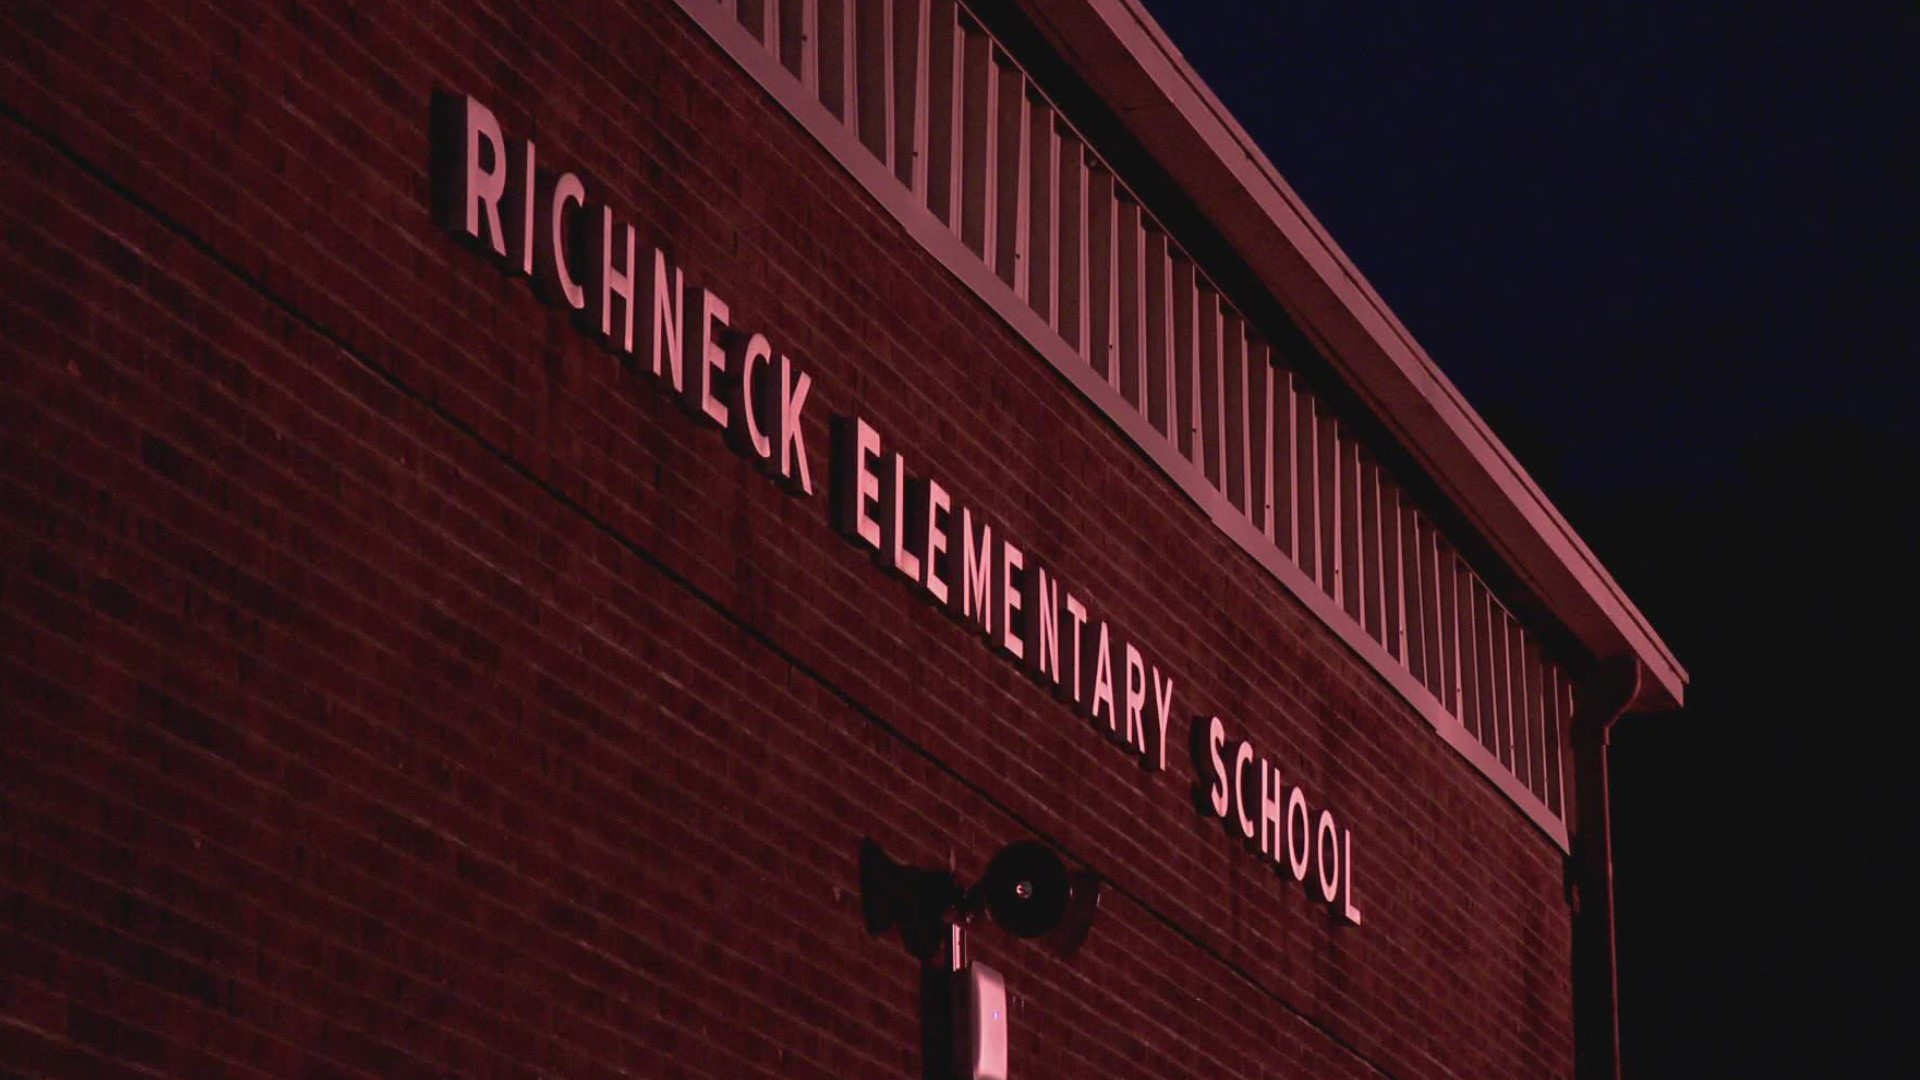 More than a month after police say a 6-year-old boy shot his teacher at Richneck Elementary, the school is dealing with another security threat.